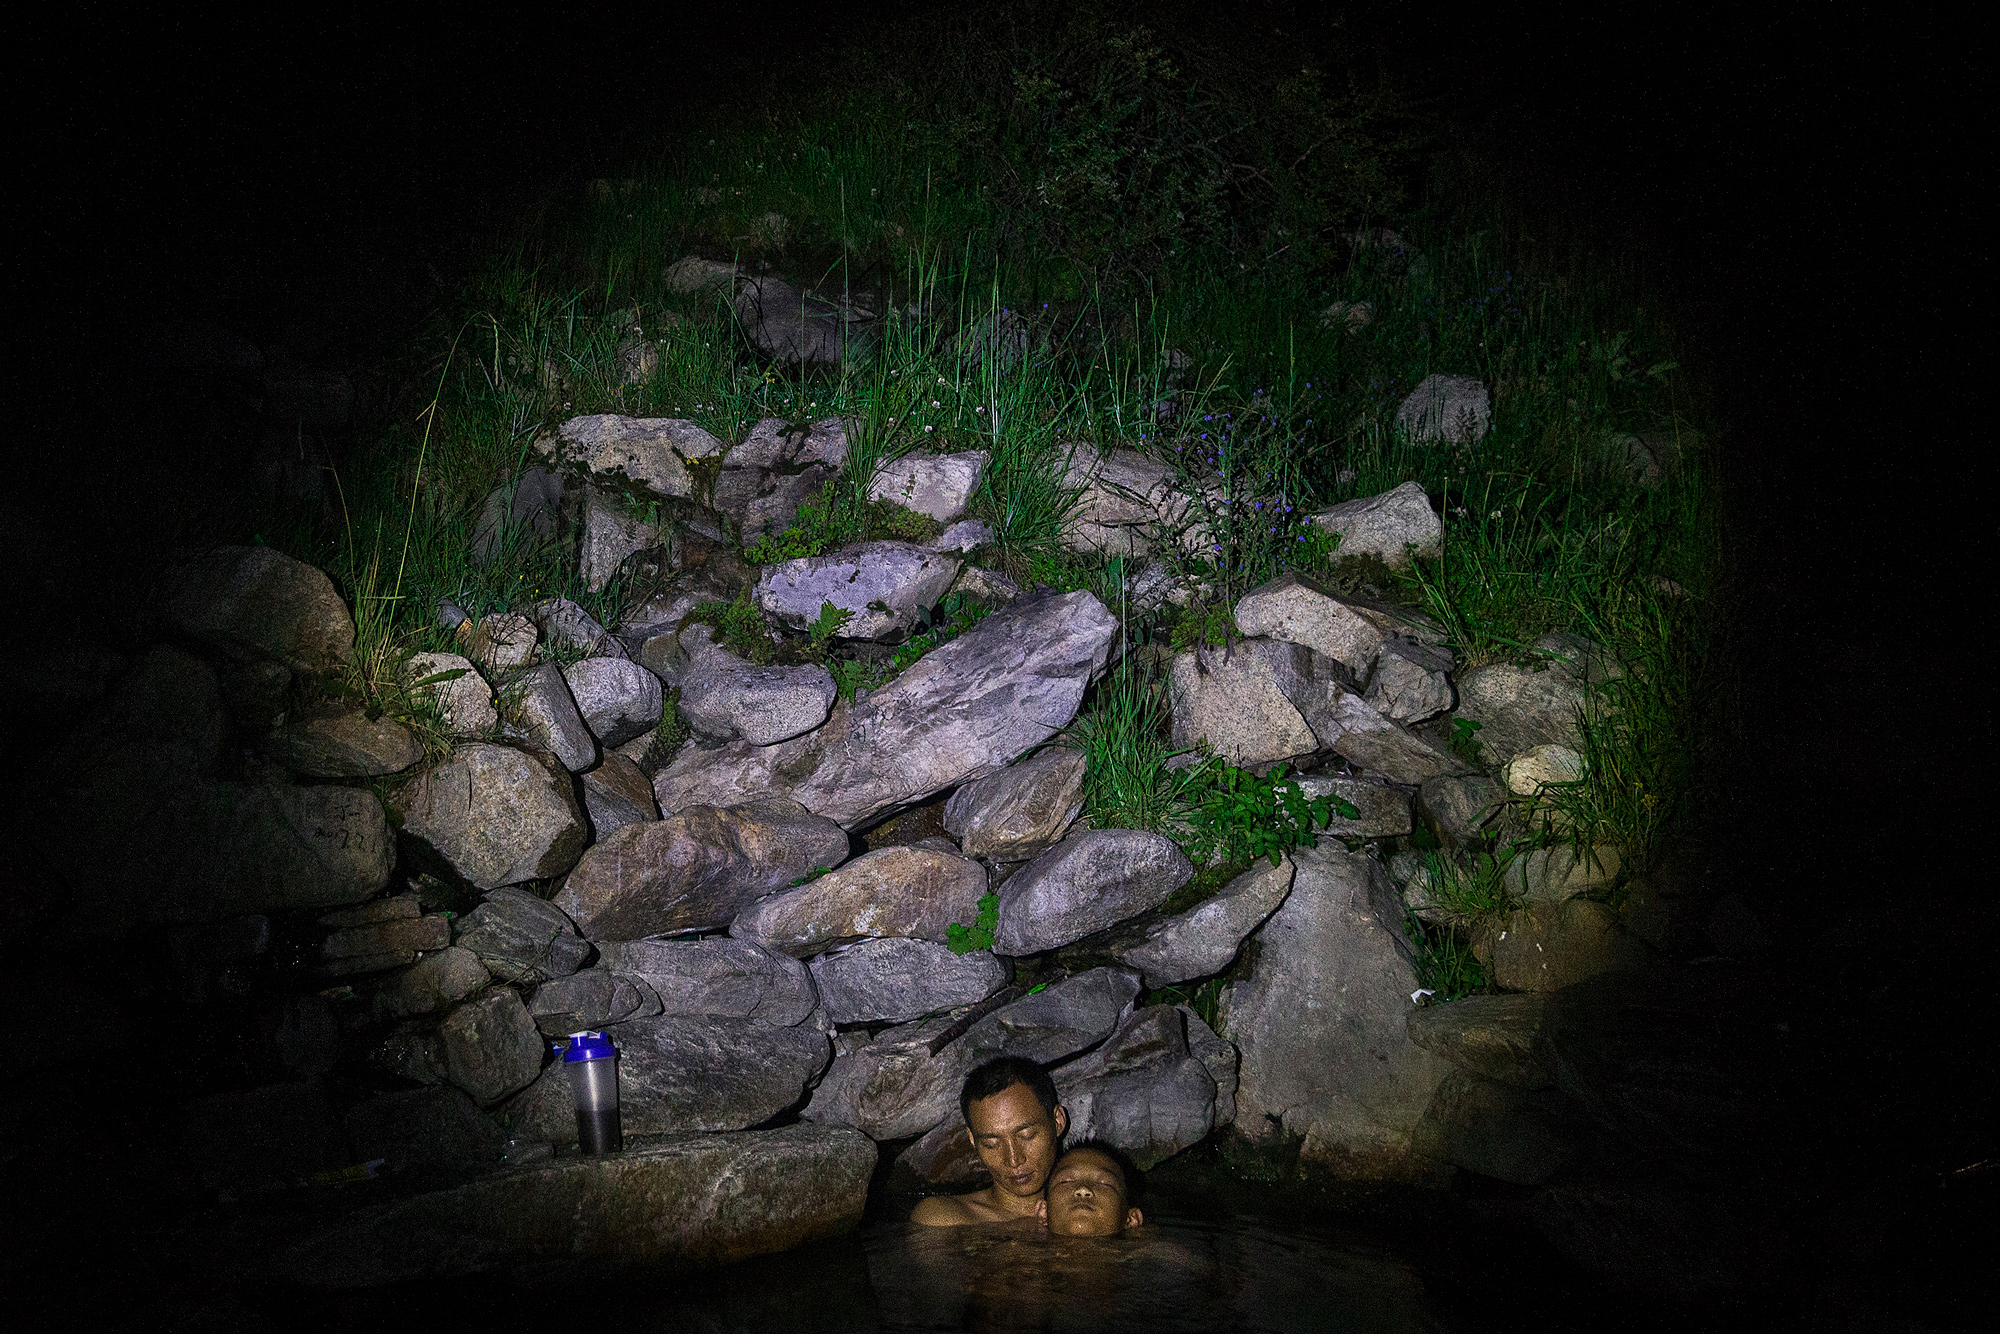 There are also relaxing moments on the trip. One evening, Chao and Runxi find a natural hot spring where they take a bath, in Zheduotang, Garze, Sichuan, July 18.